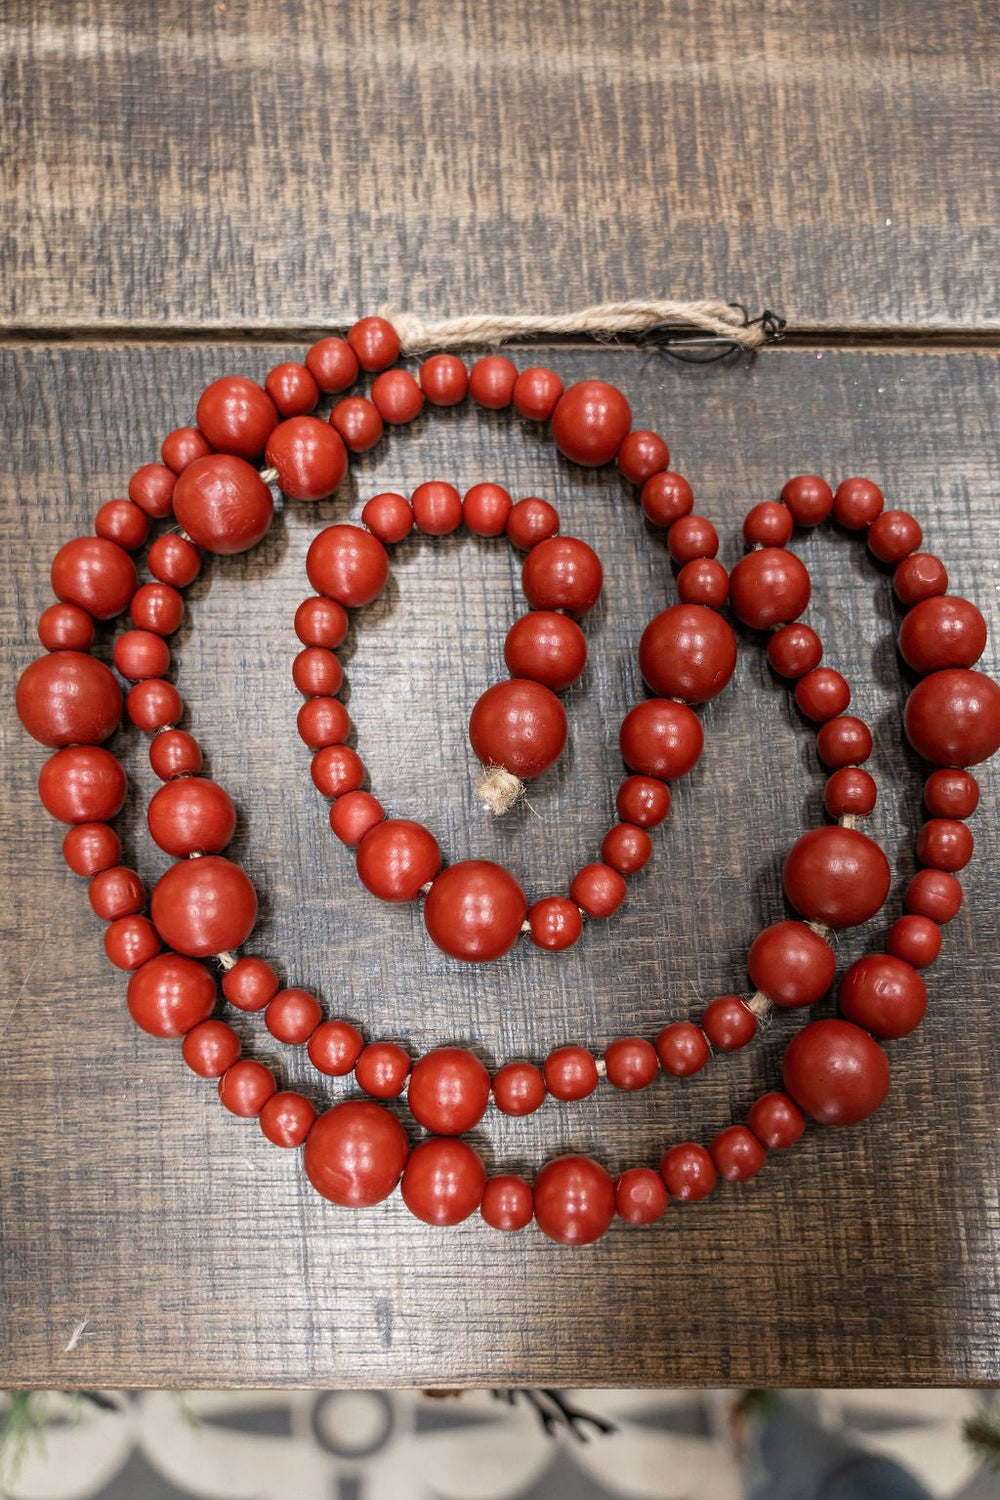 CWI GCM200217 Red Wooden Bead Garland